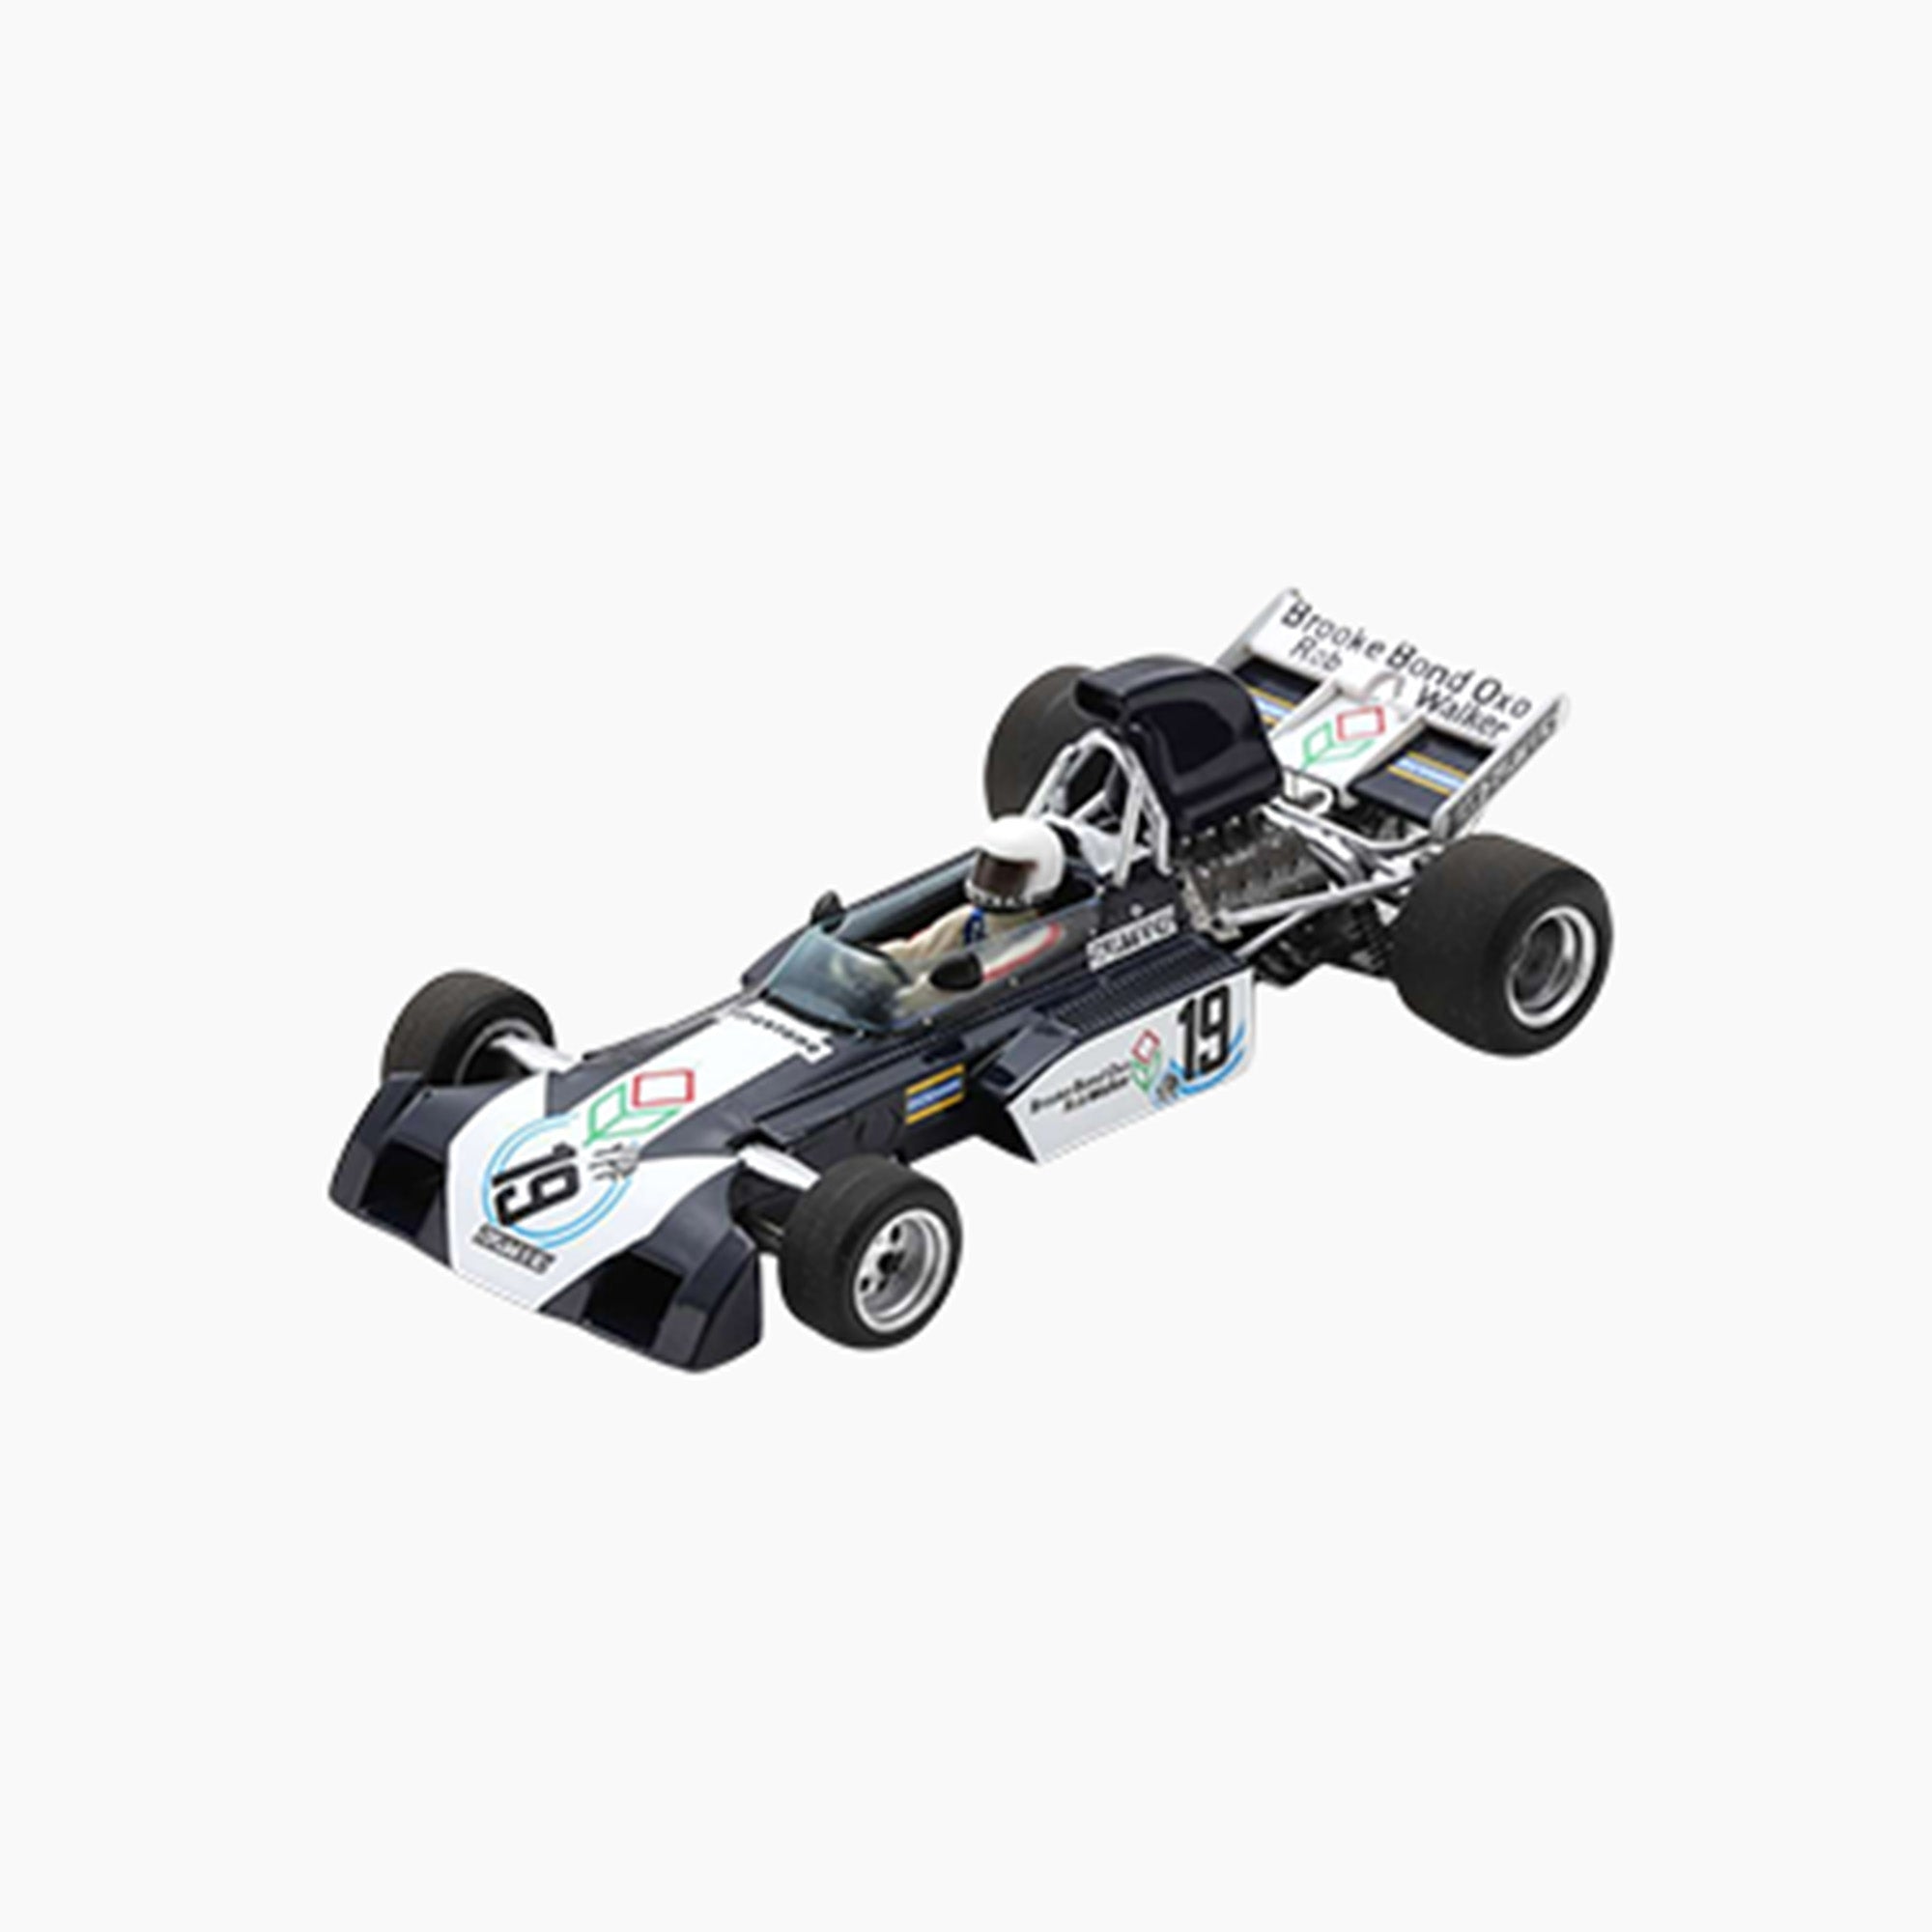 Surtees TS9B No.19 5th Argentinean GP 1972 | 1:43 Scale Model-1:43 Scale Model-Spark Models-gpx-store